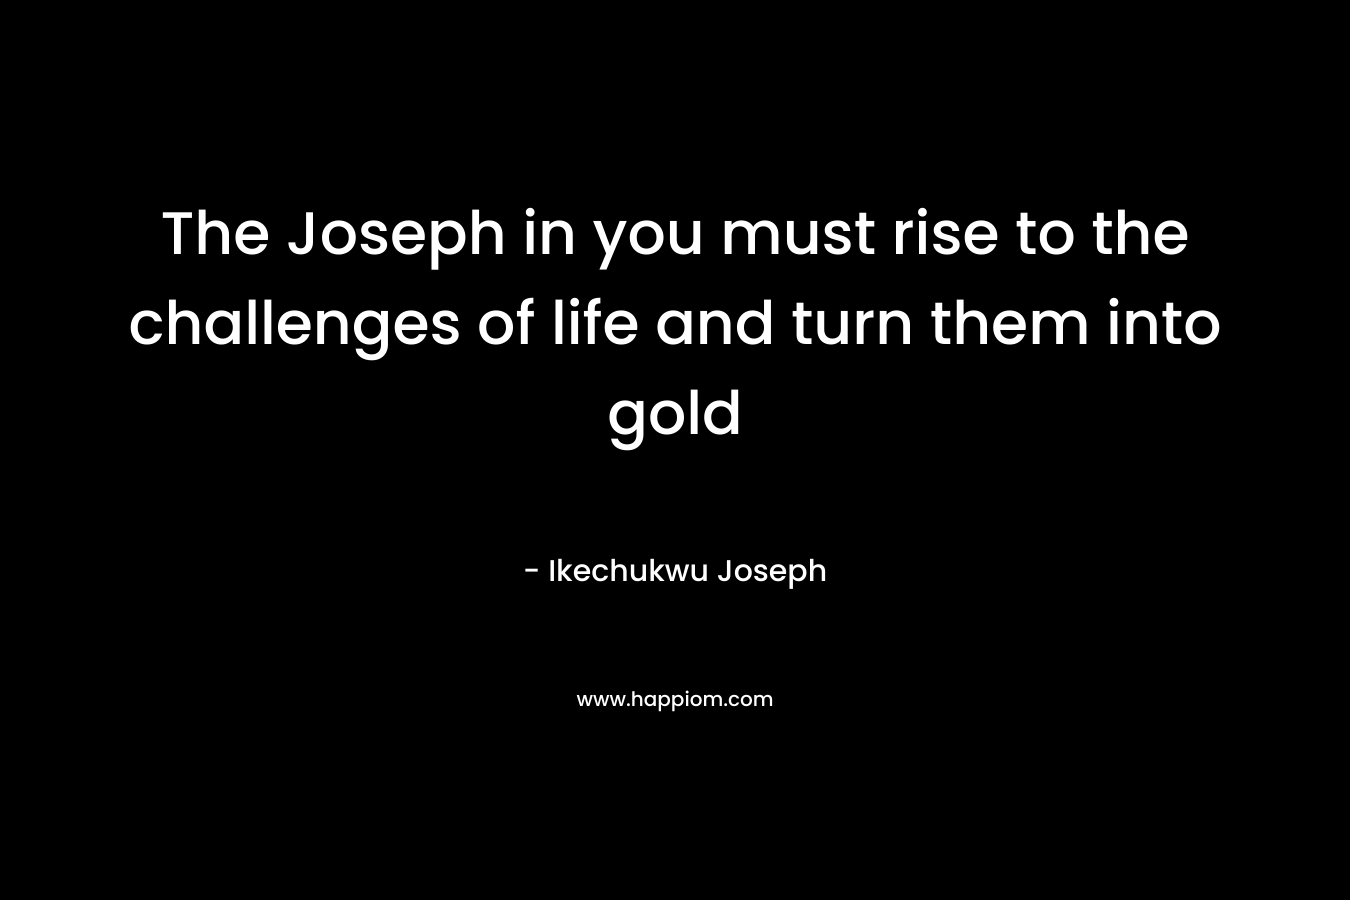 The Joseph in you must rise to the challenges of life and turn them into gold